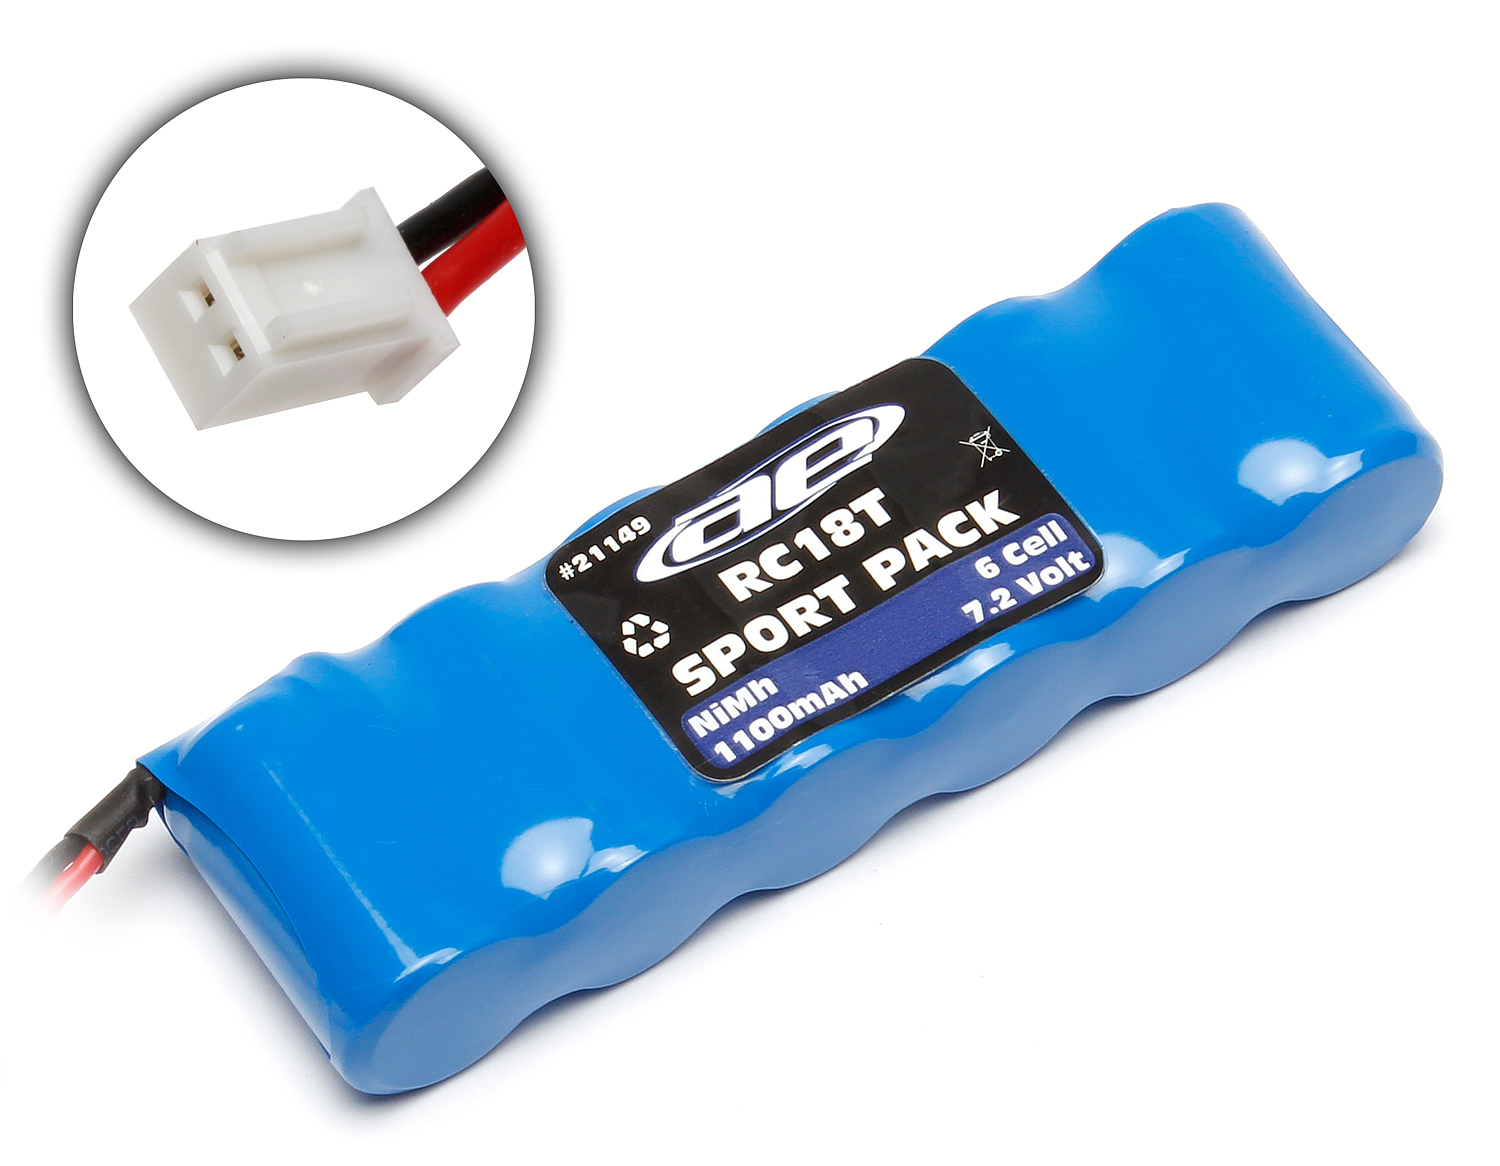 1100mAh 1:18 Sport Pack with M-Plug Connector